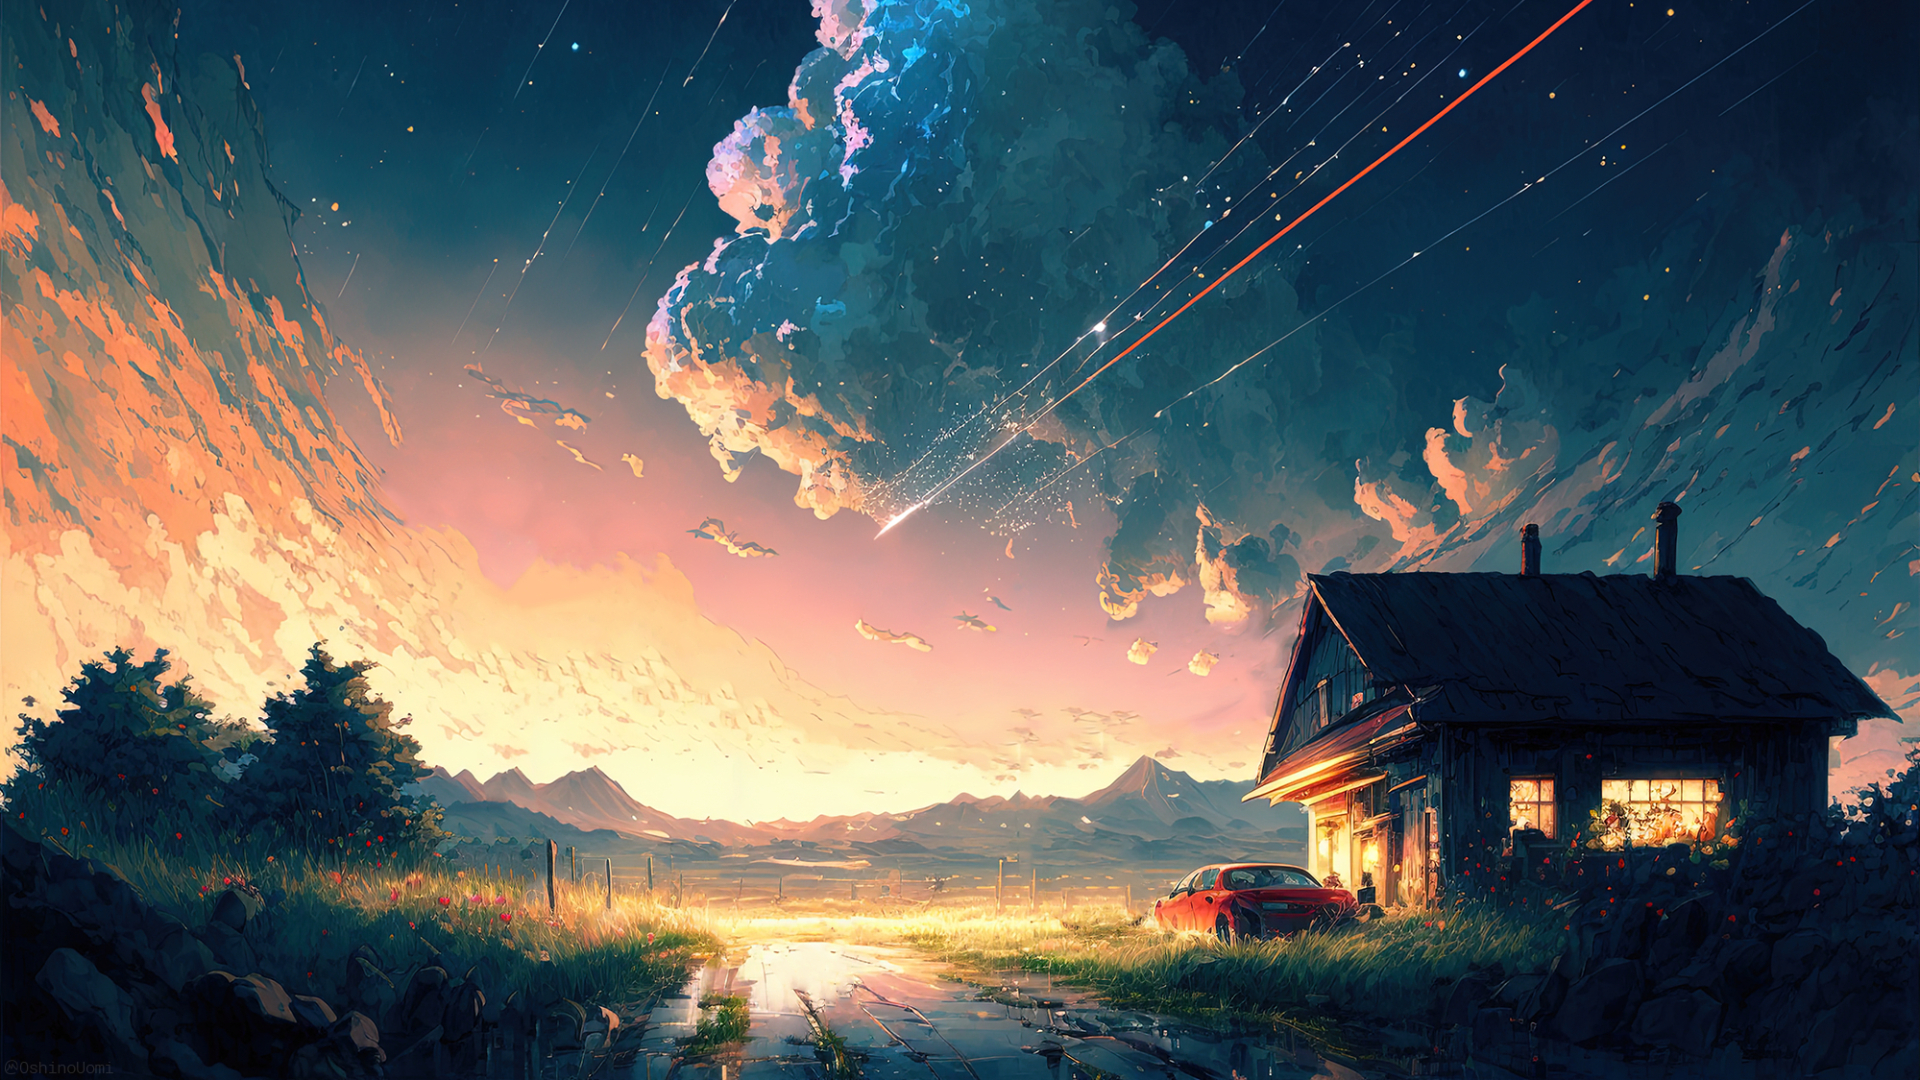 Lexica - Fantastic Anime Sunset Rural Scenery, wallpaper, Beautiful  lighting, Dreamy, Ethereal Sky, Vibrant